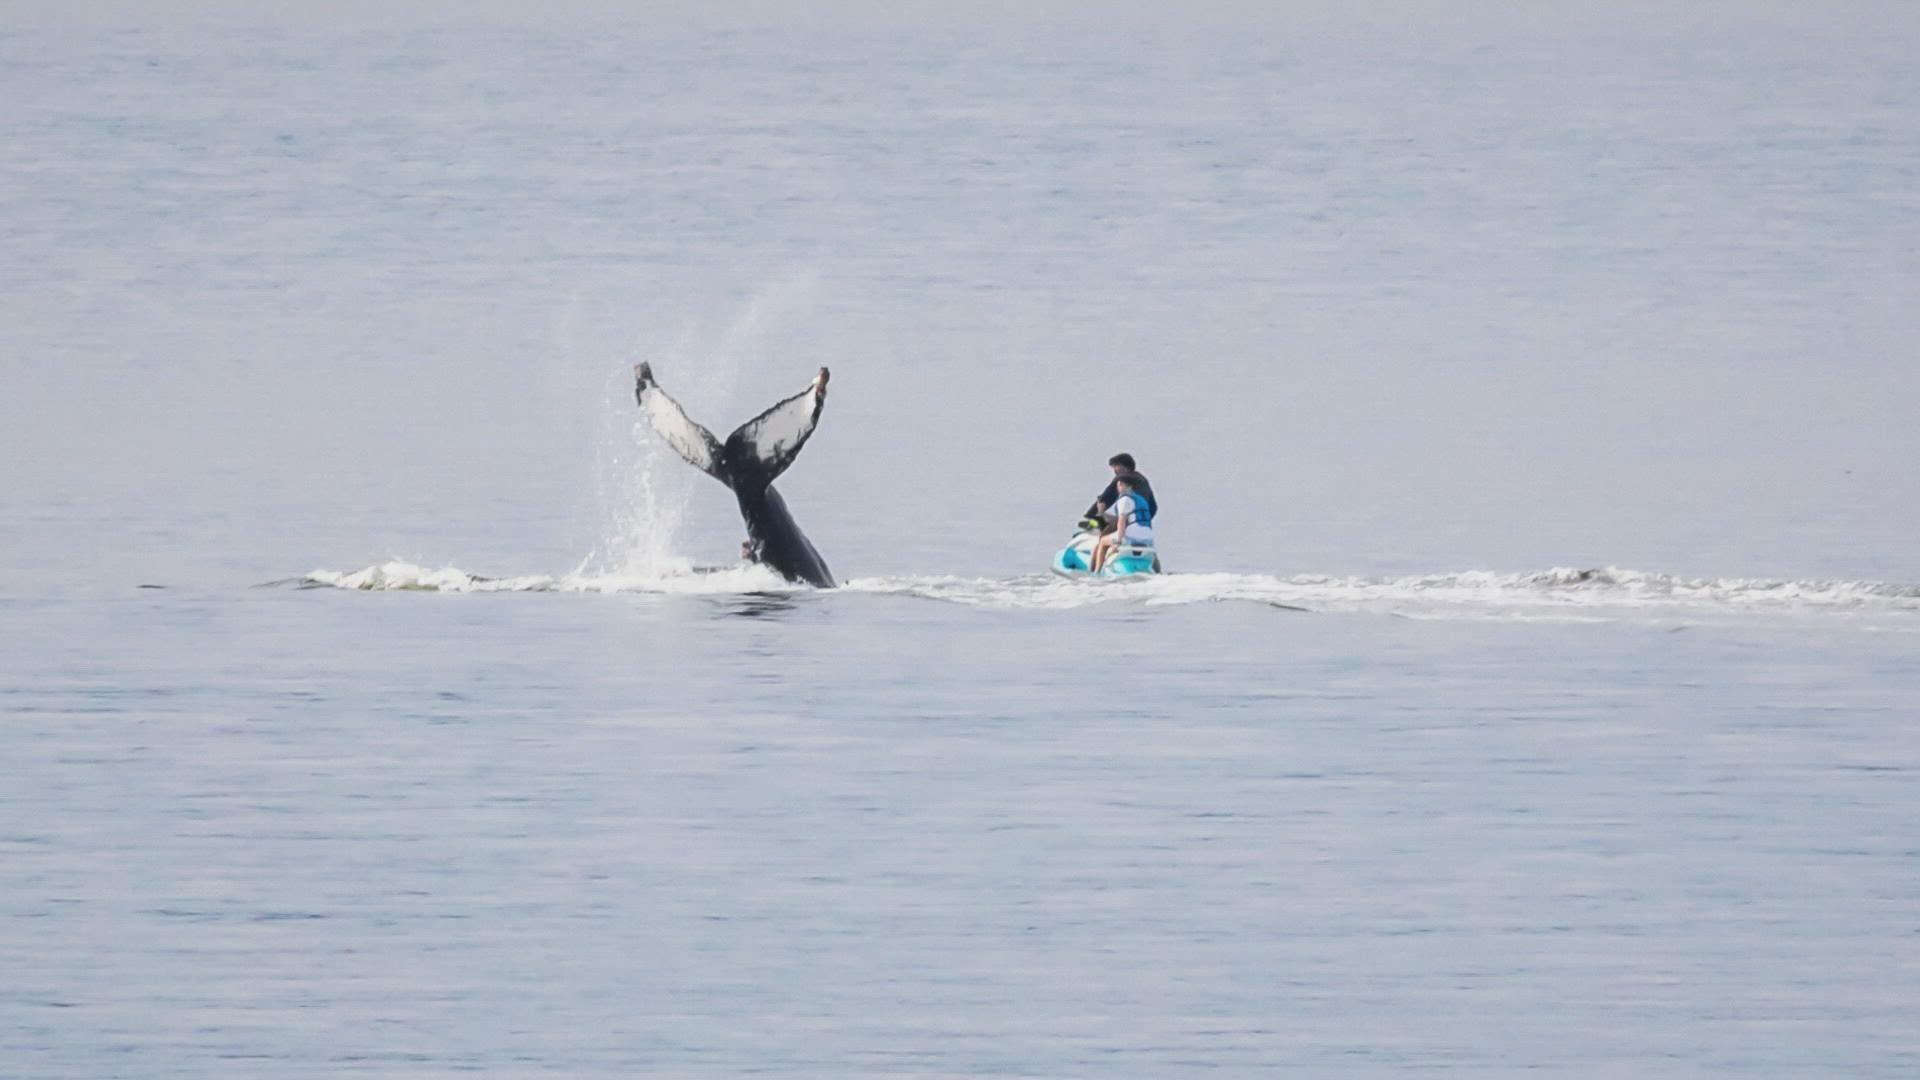 “It appears to be – from all indications a clear violation of the MMPA rules regarding within 100 yards of a humpback whale,” said Capt. Alan Myers of the WDFW.